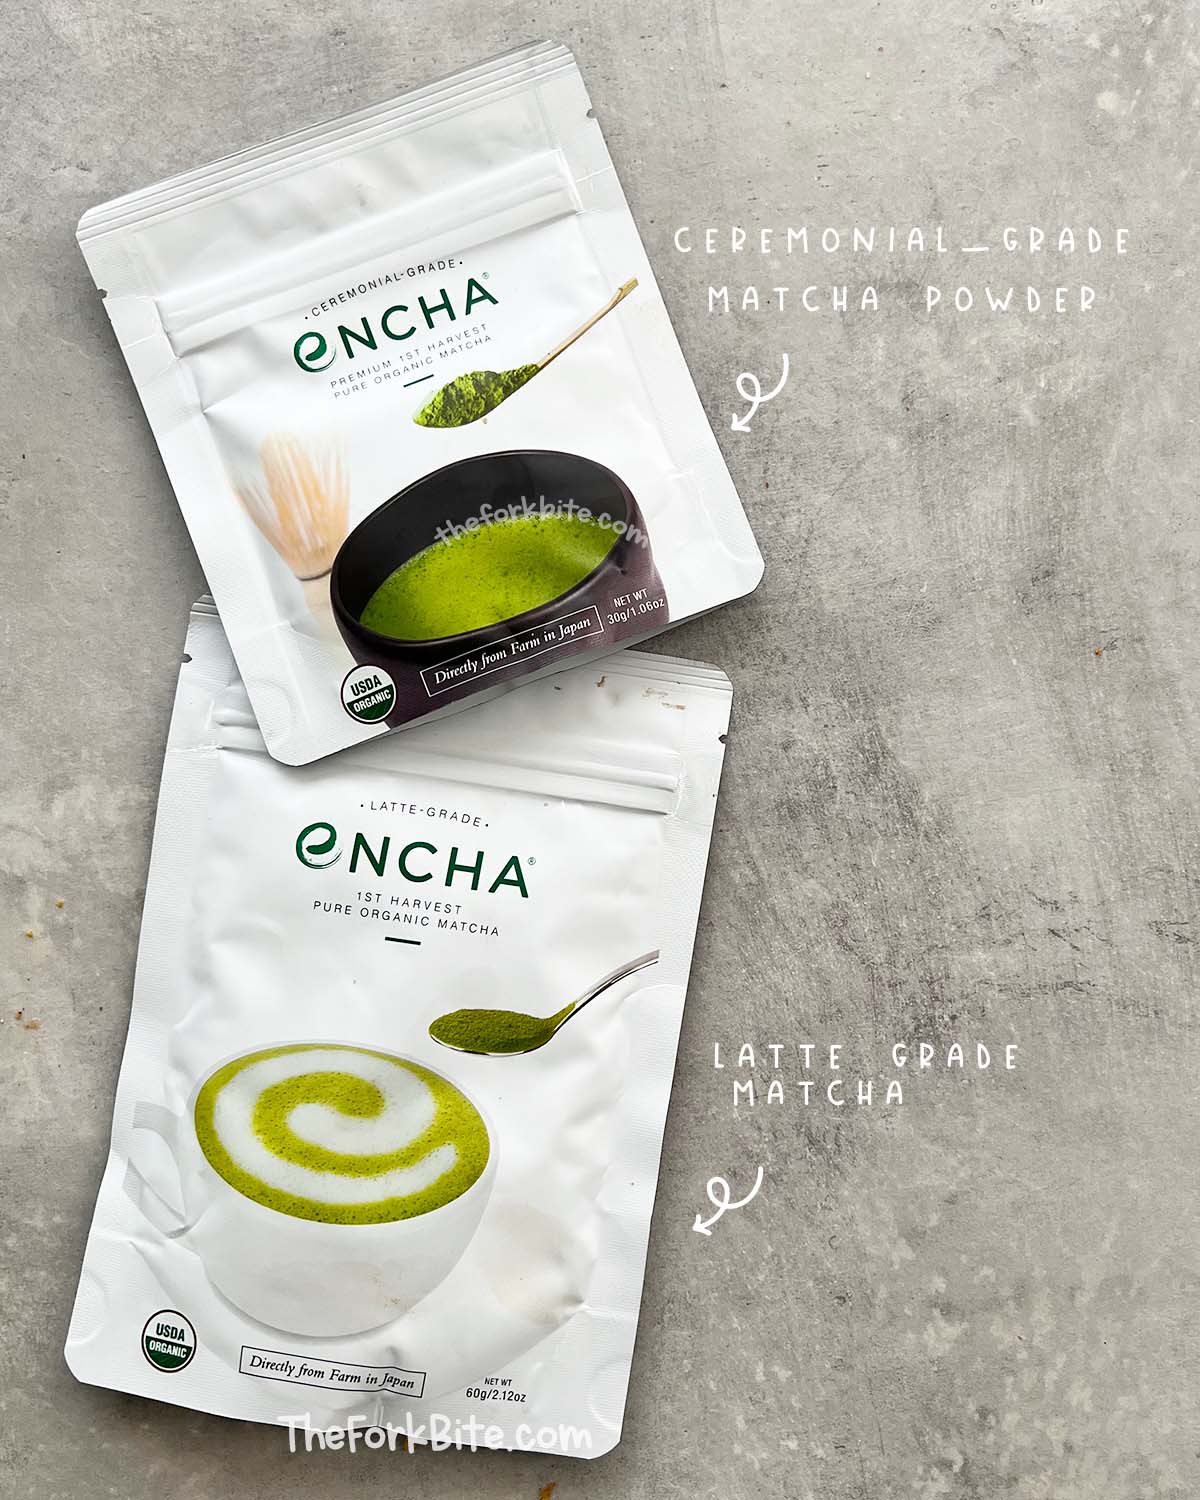 Matcha powder is a critical ingredient in matcha chai latte. You don't need to use ceremonial matcha powder. It's essential to use a good quality, culinary-grade matcha powder for this recipe.